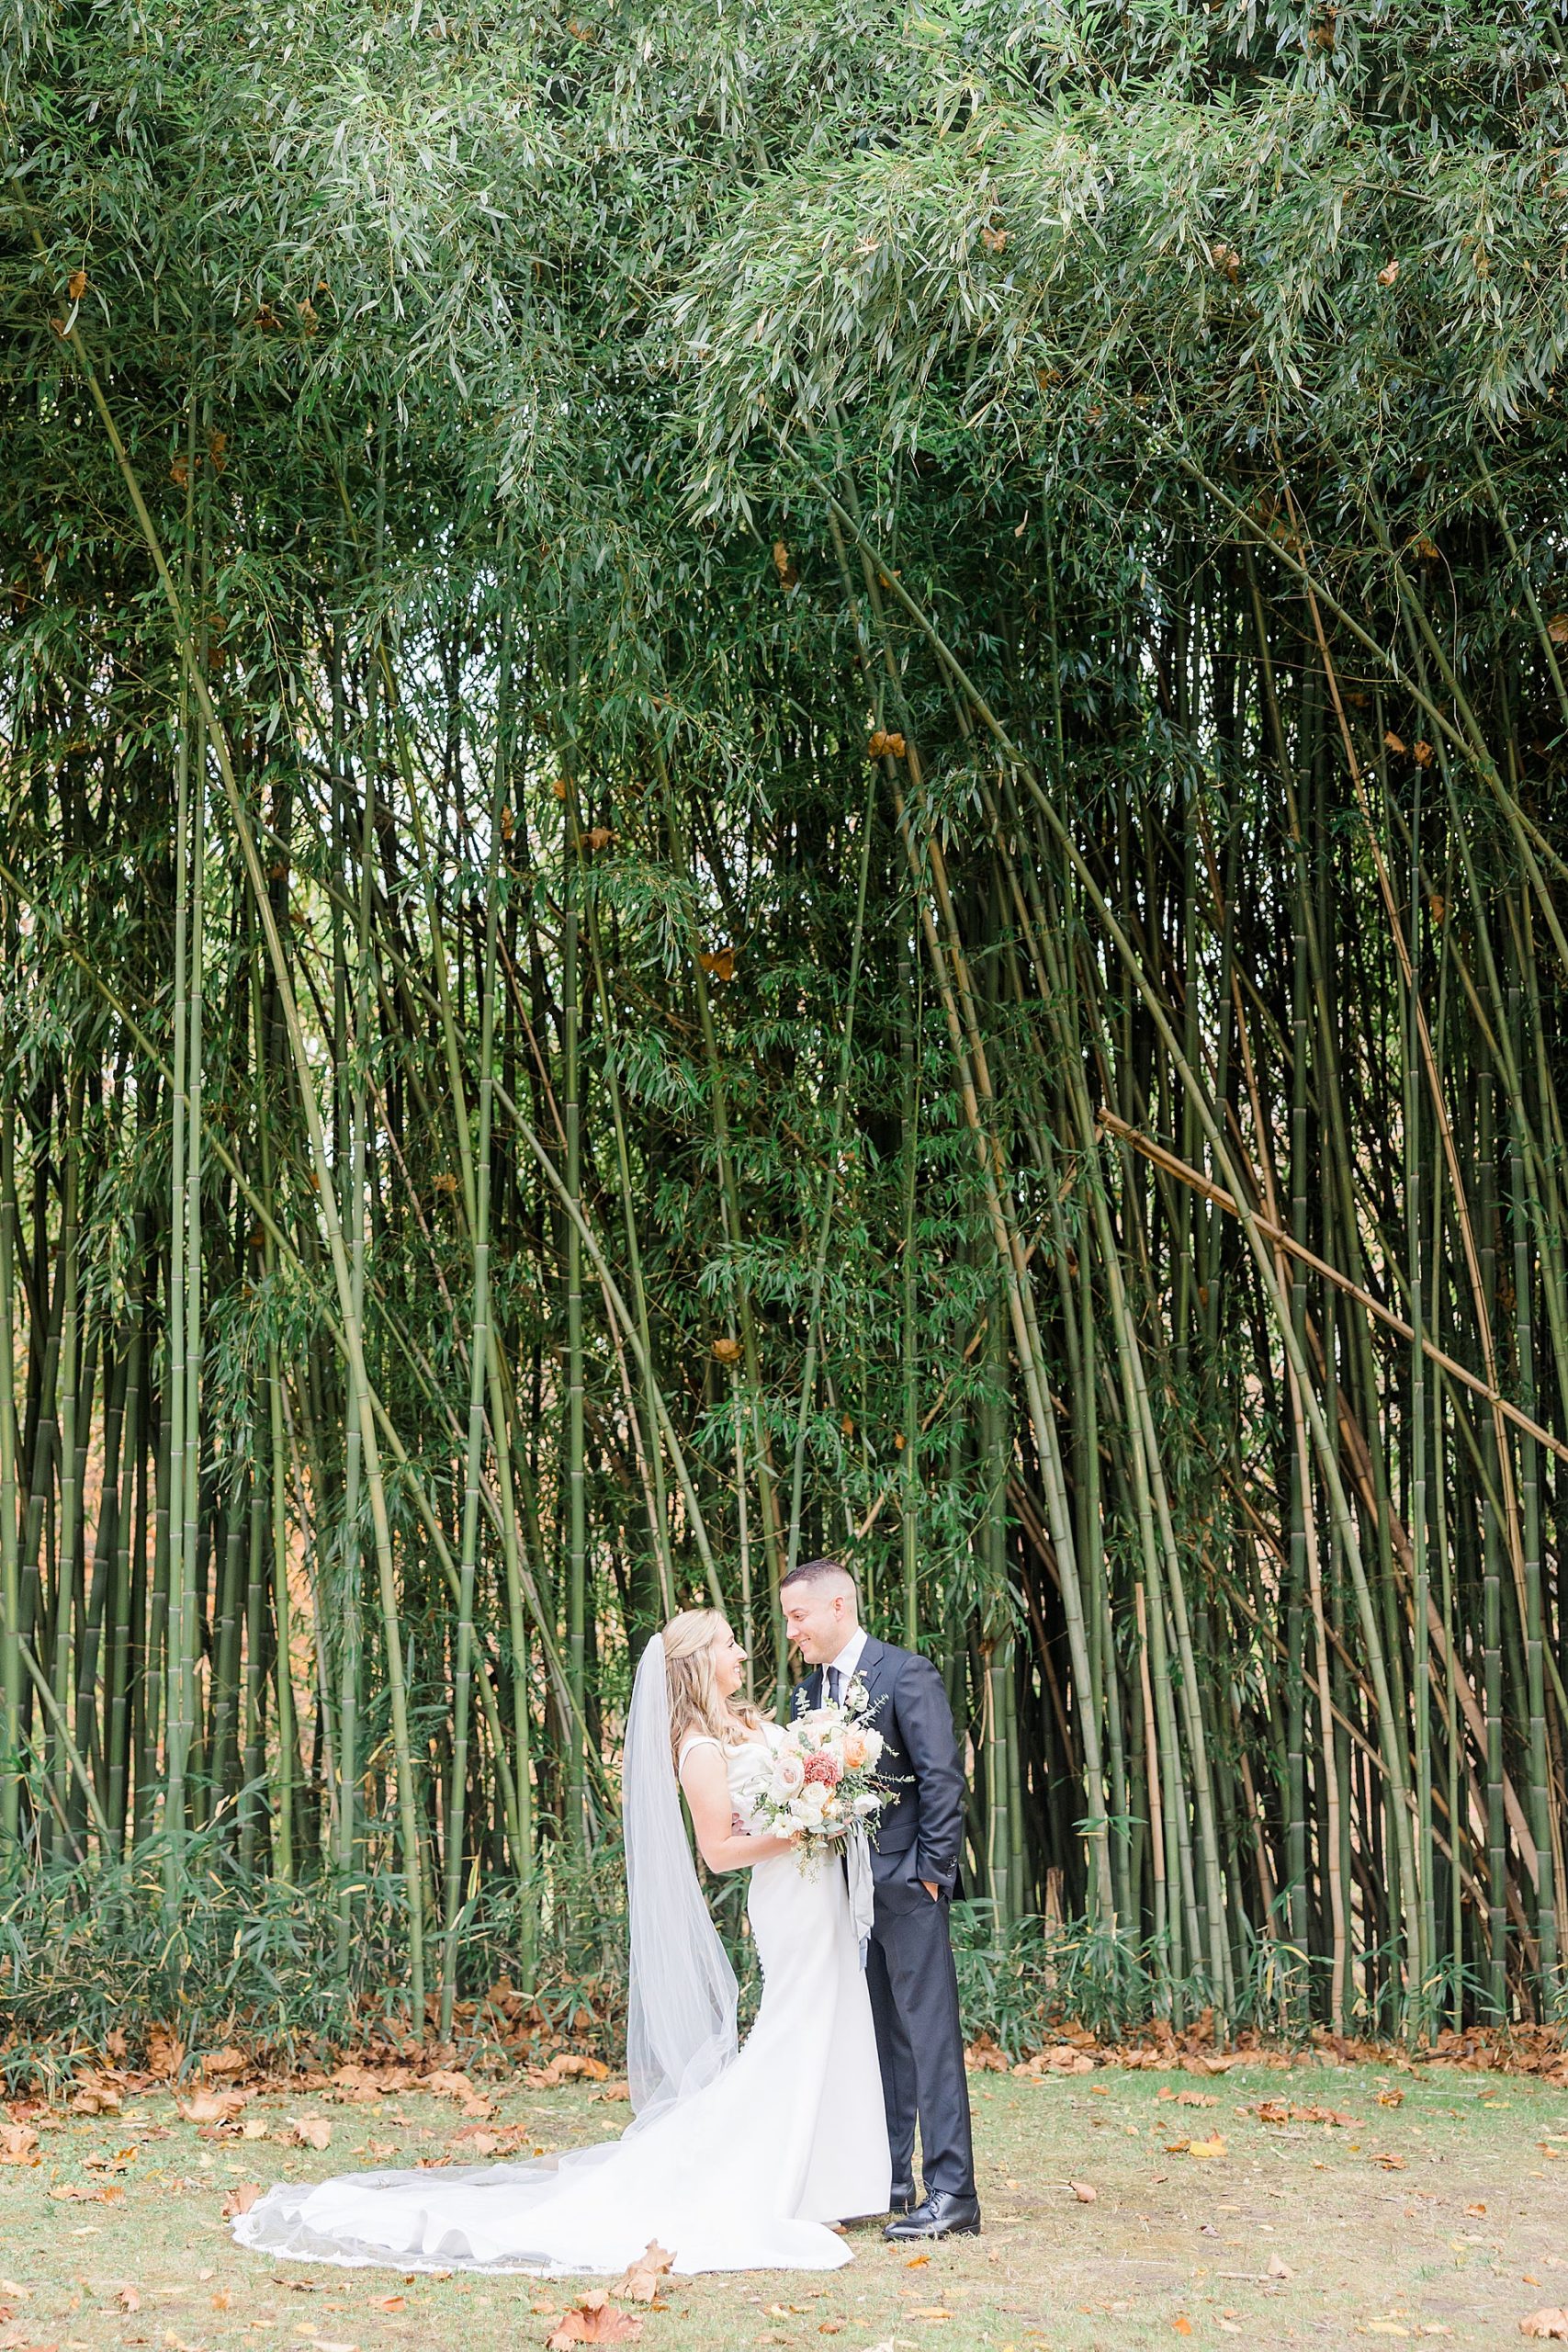 wedding portraits with bamboo trees in the background